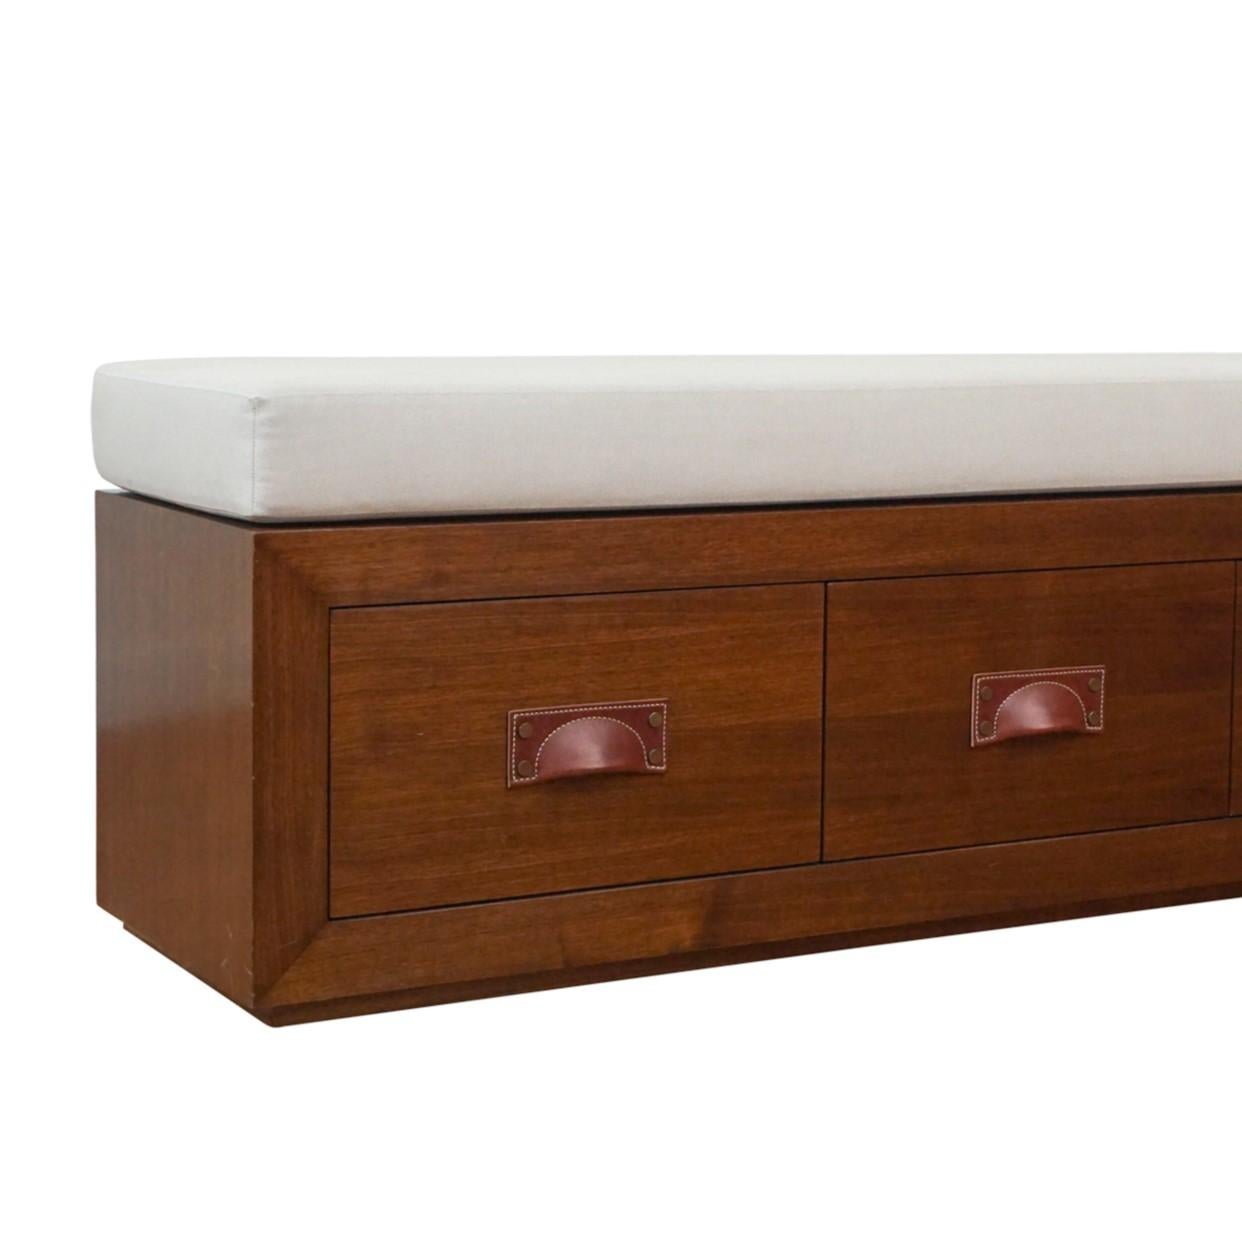 Custom storage bench on plinth base with leather pull hardware. Shown in medium walnut and upholstered in a natural linen fabric. Also available in white or black lacquer, light cerused oak, and oil rubbed teak.

COM: 5 yards
Lead Time: 6-8